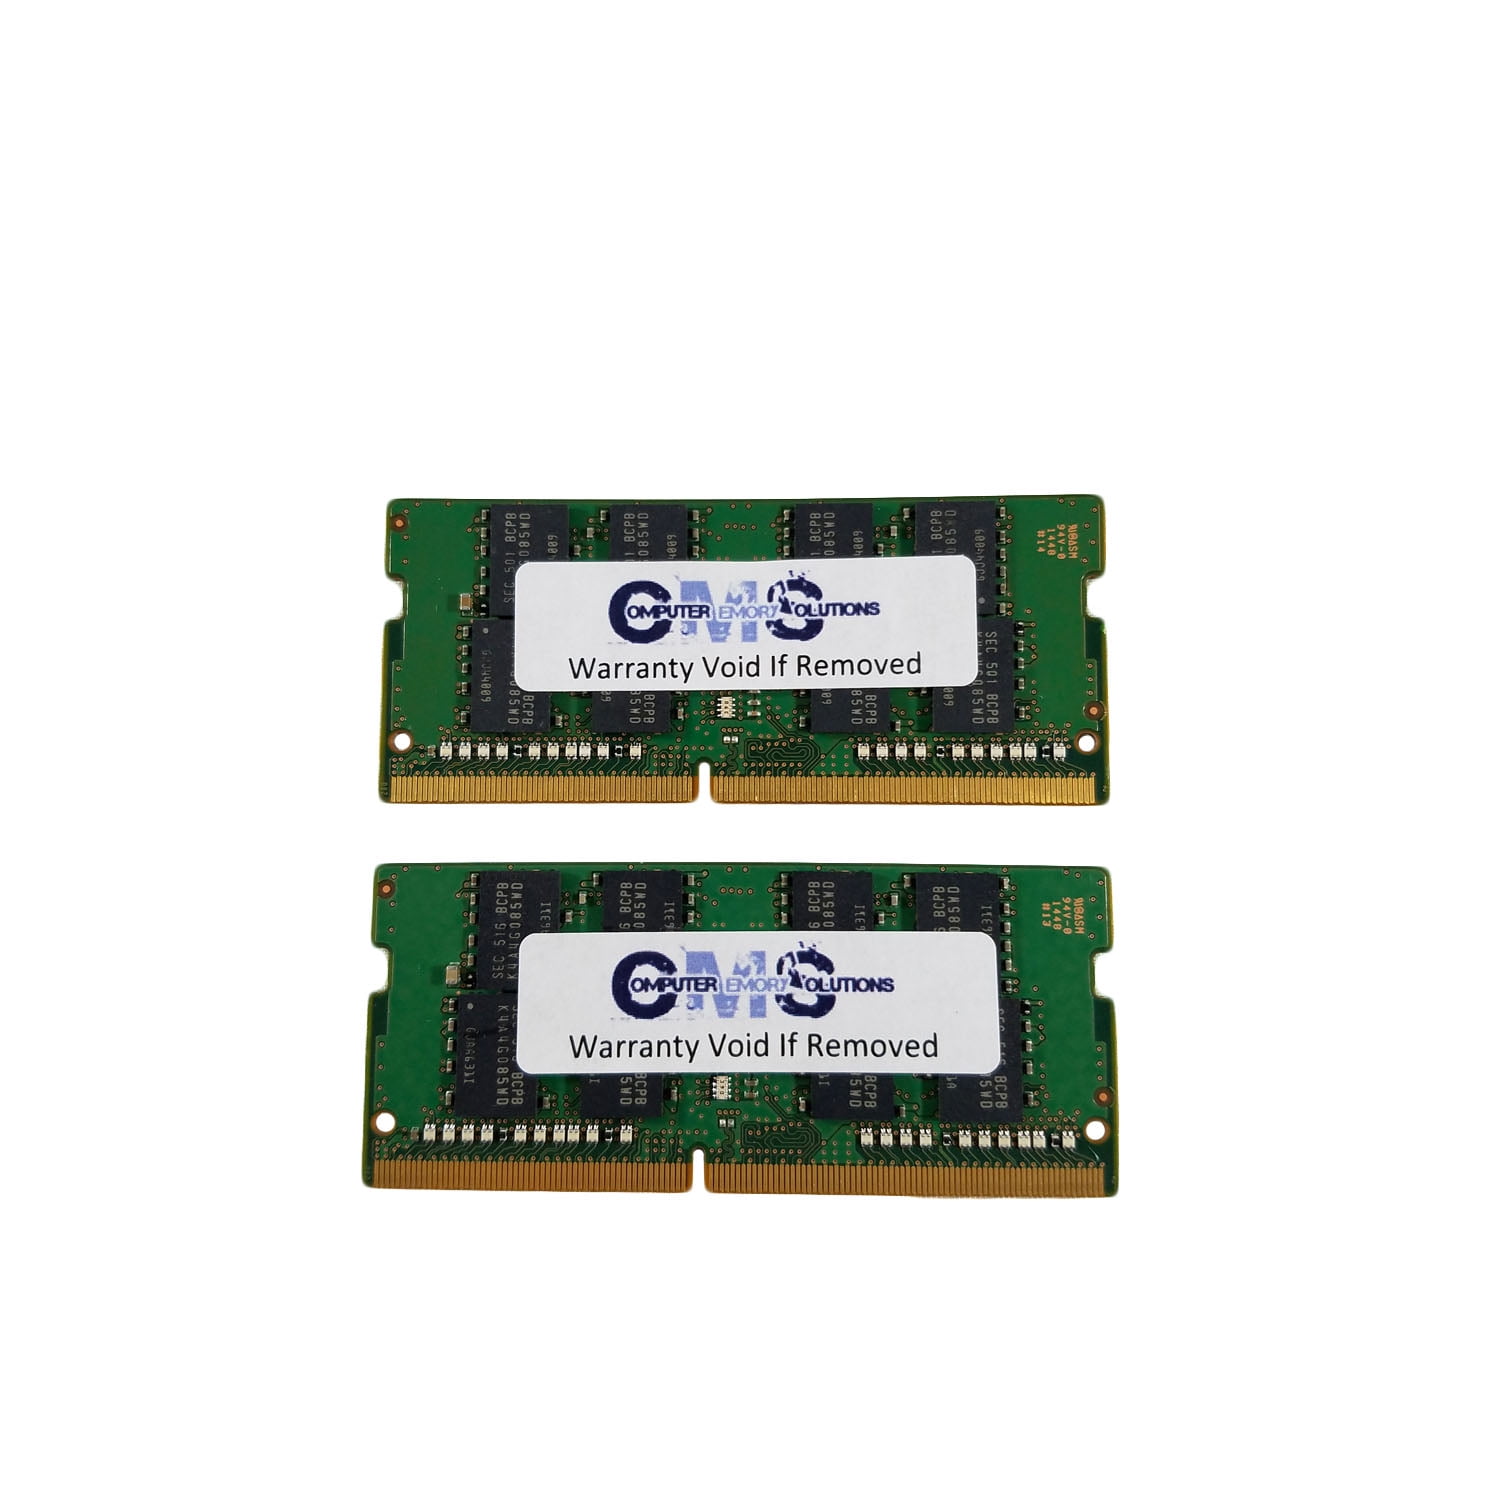 Memory Ram Compatible with Dell Inspiron 1405 Notebook Ddr2 by CMS A37 2X2GB 4GB 